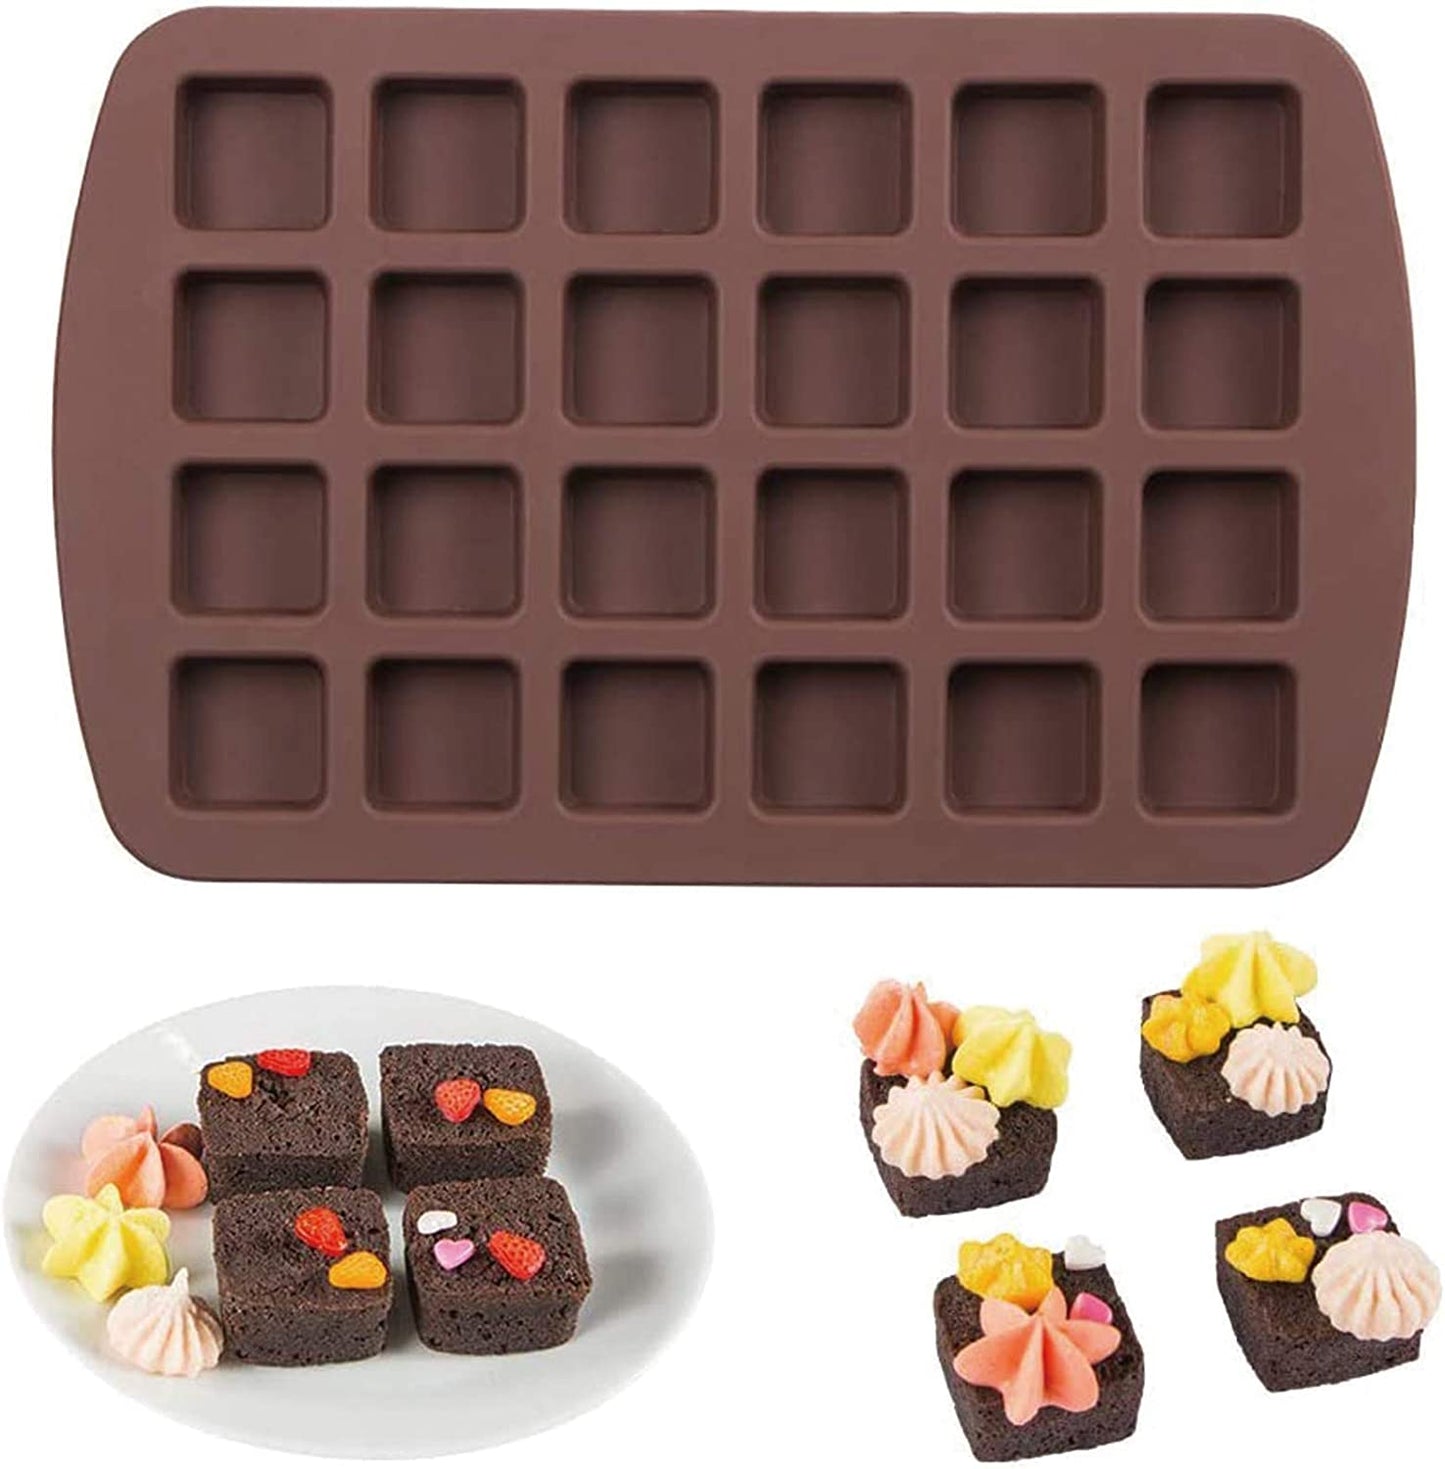 Travelwant Silicone Square Cake Pan, 8x8 Baking Pan, Brownie Pan - Nonstick  Silicone Cake Molds, Silicone Baking Mold for Brownies, Cakes, Rice Crispy